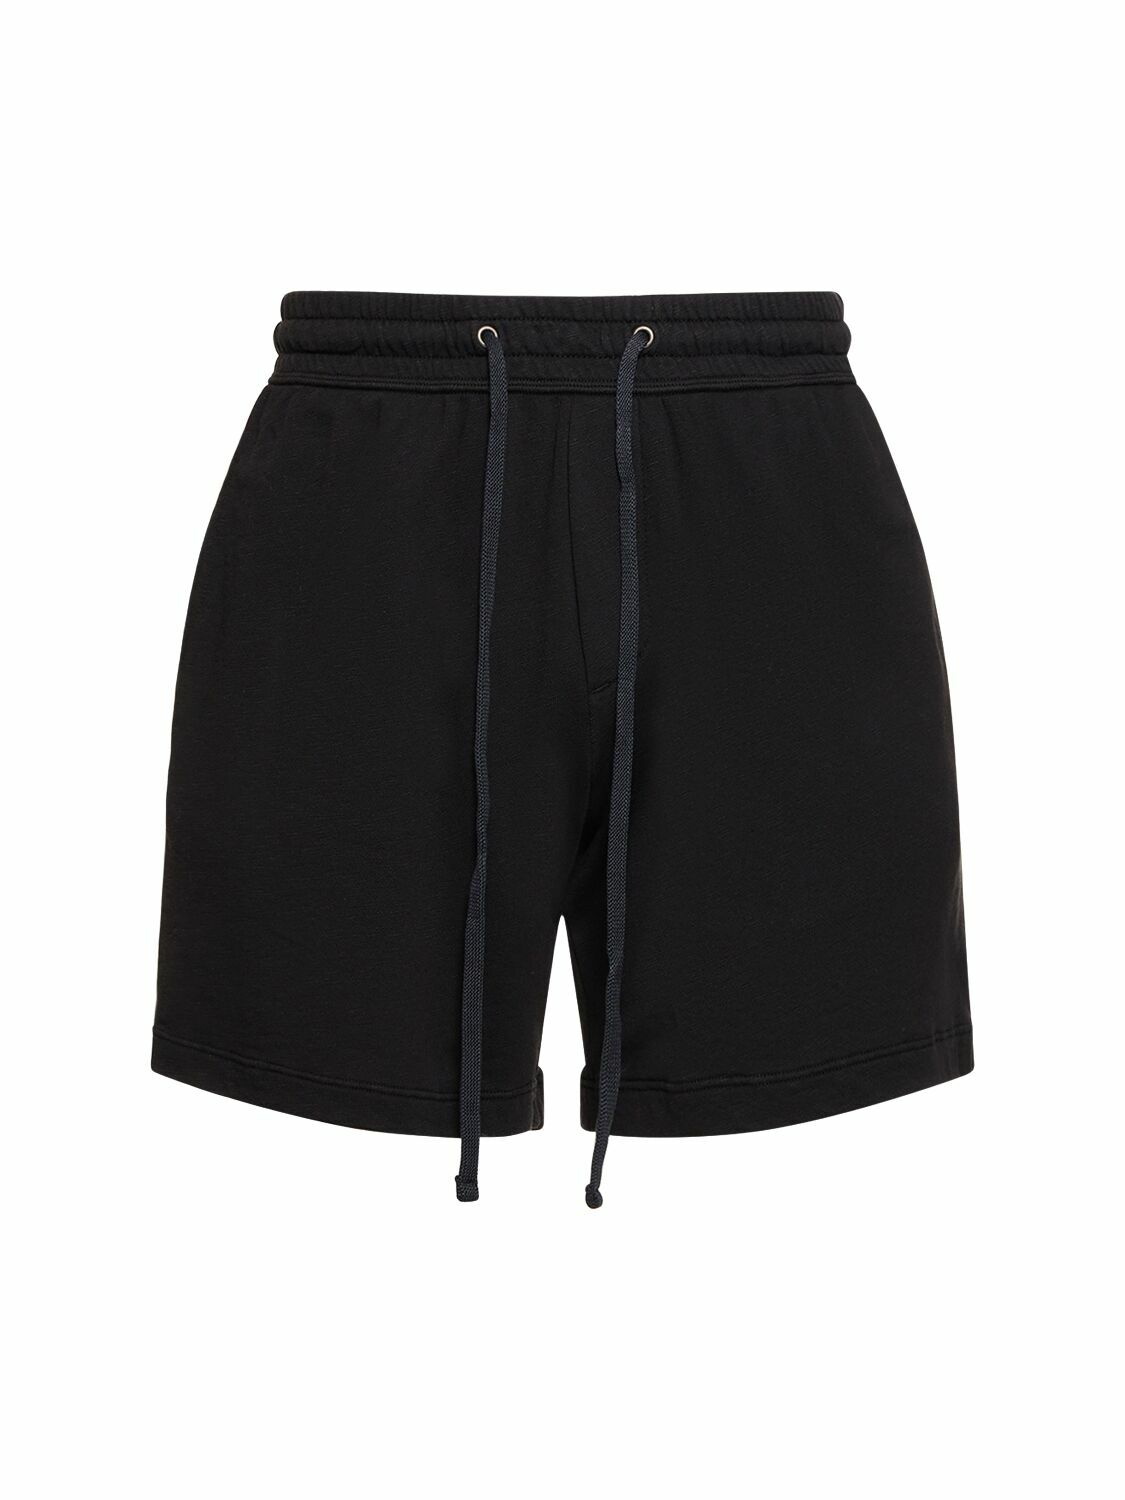 Photo: JAMES PERSE - Vintage Cotton French Terry Sweat Shorts